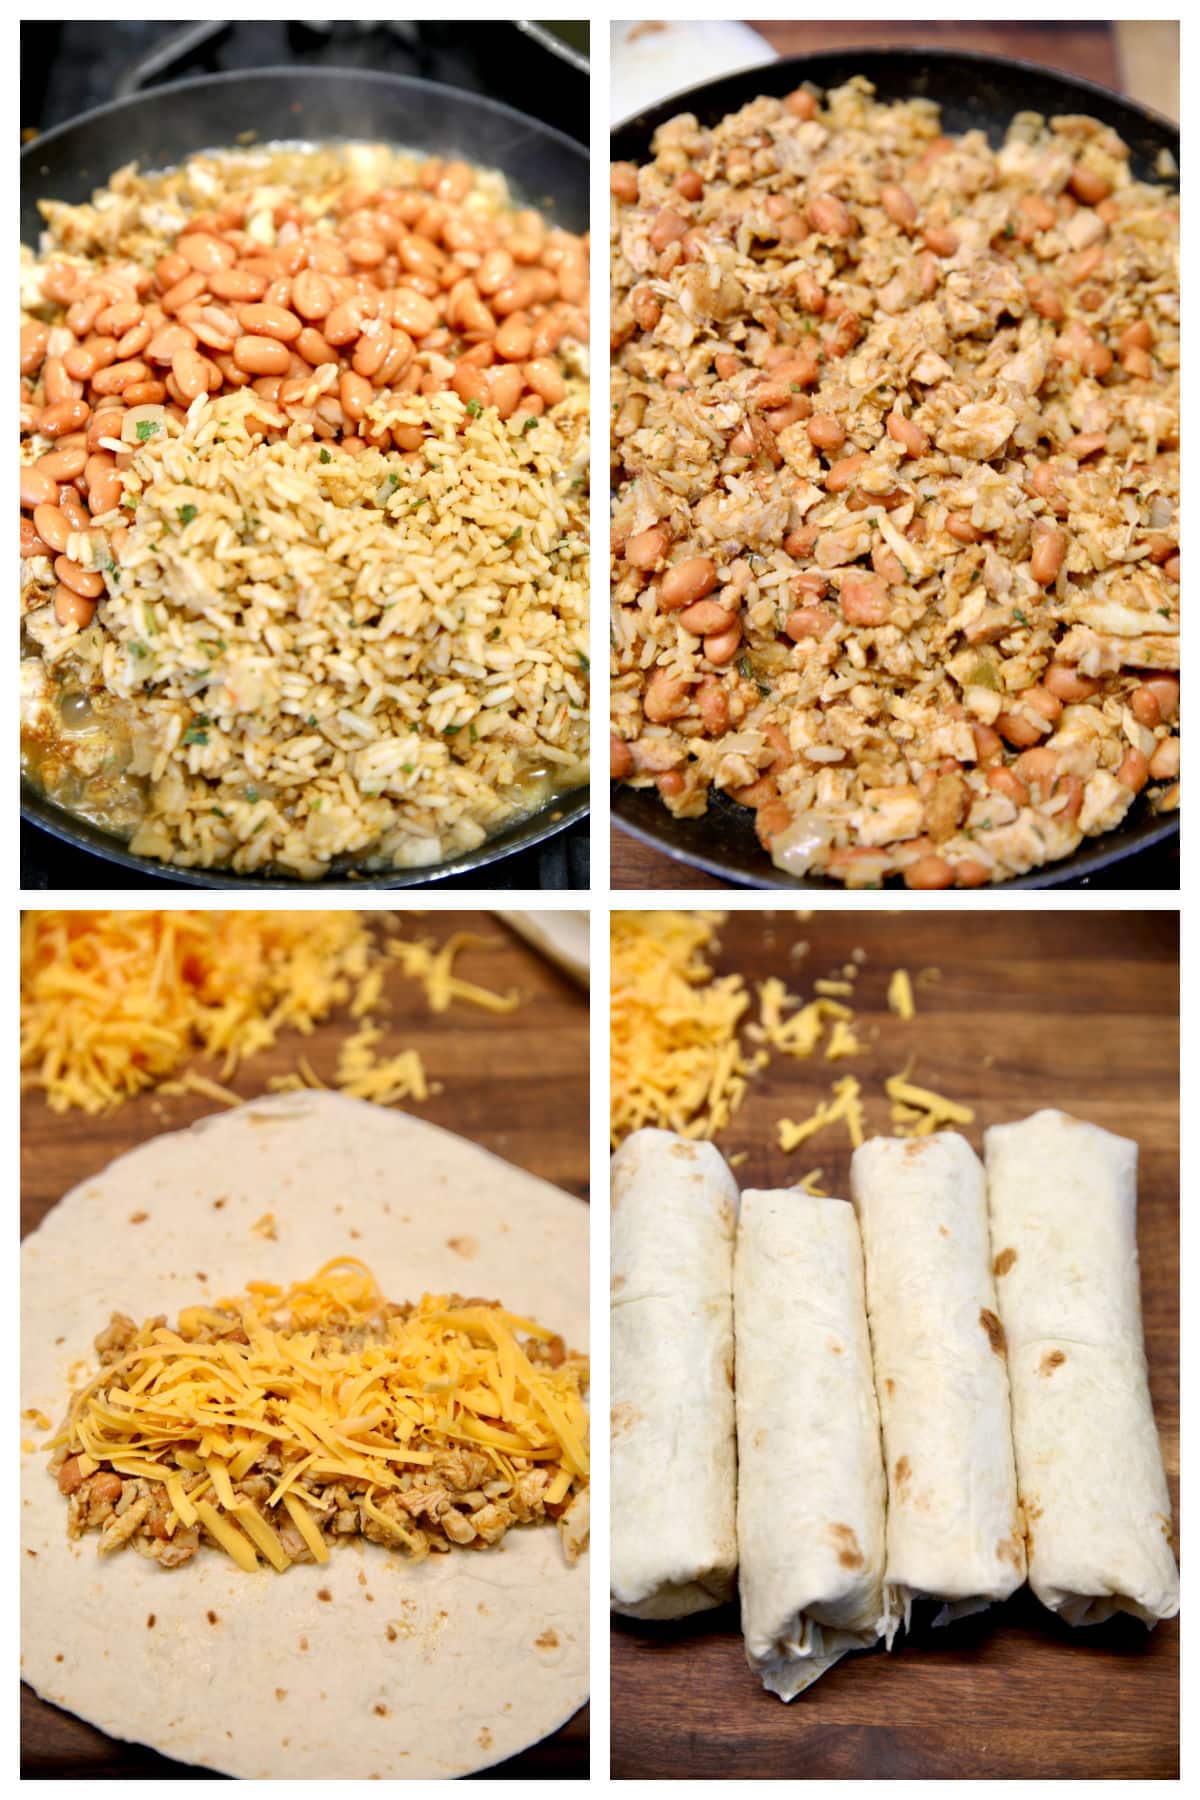 Making chicken burritos with rice, beans and cheese.